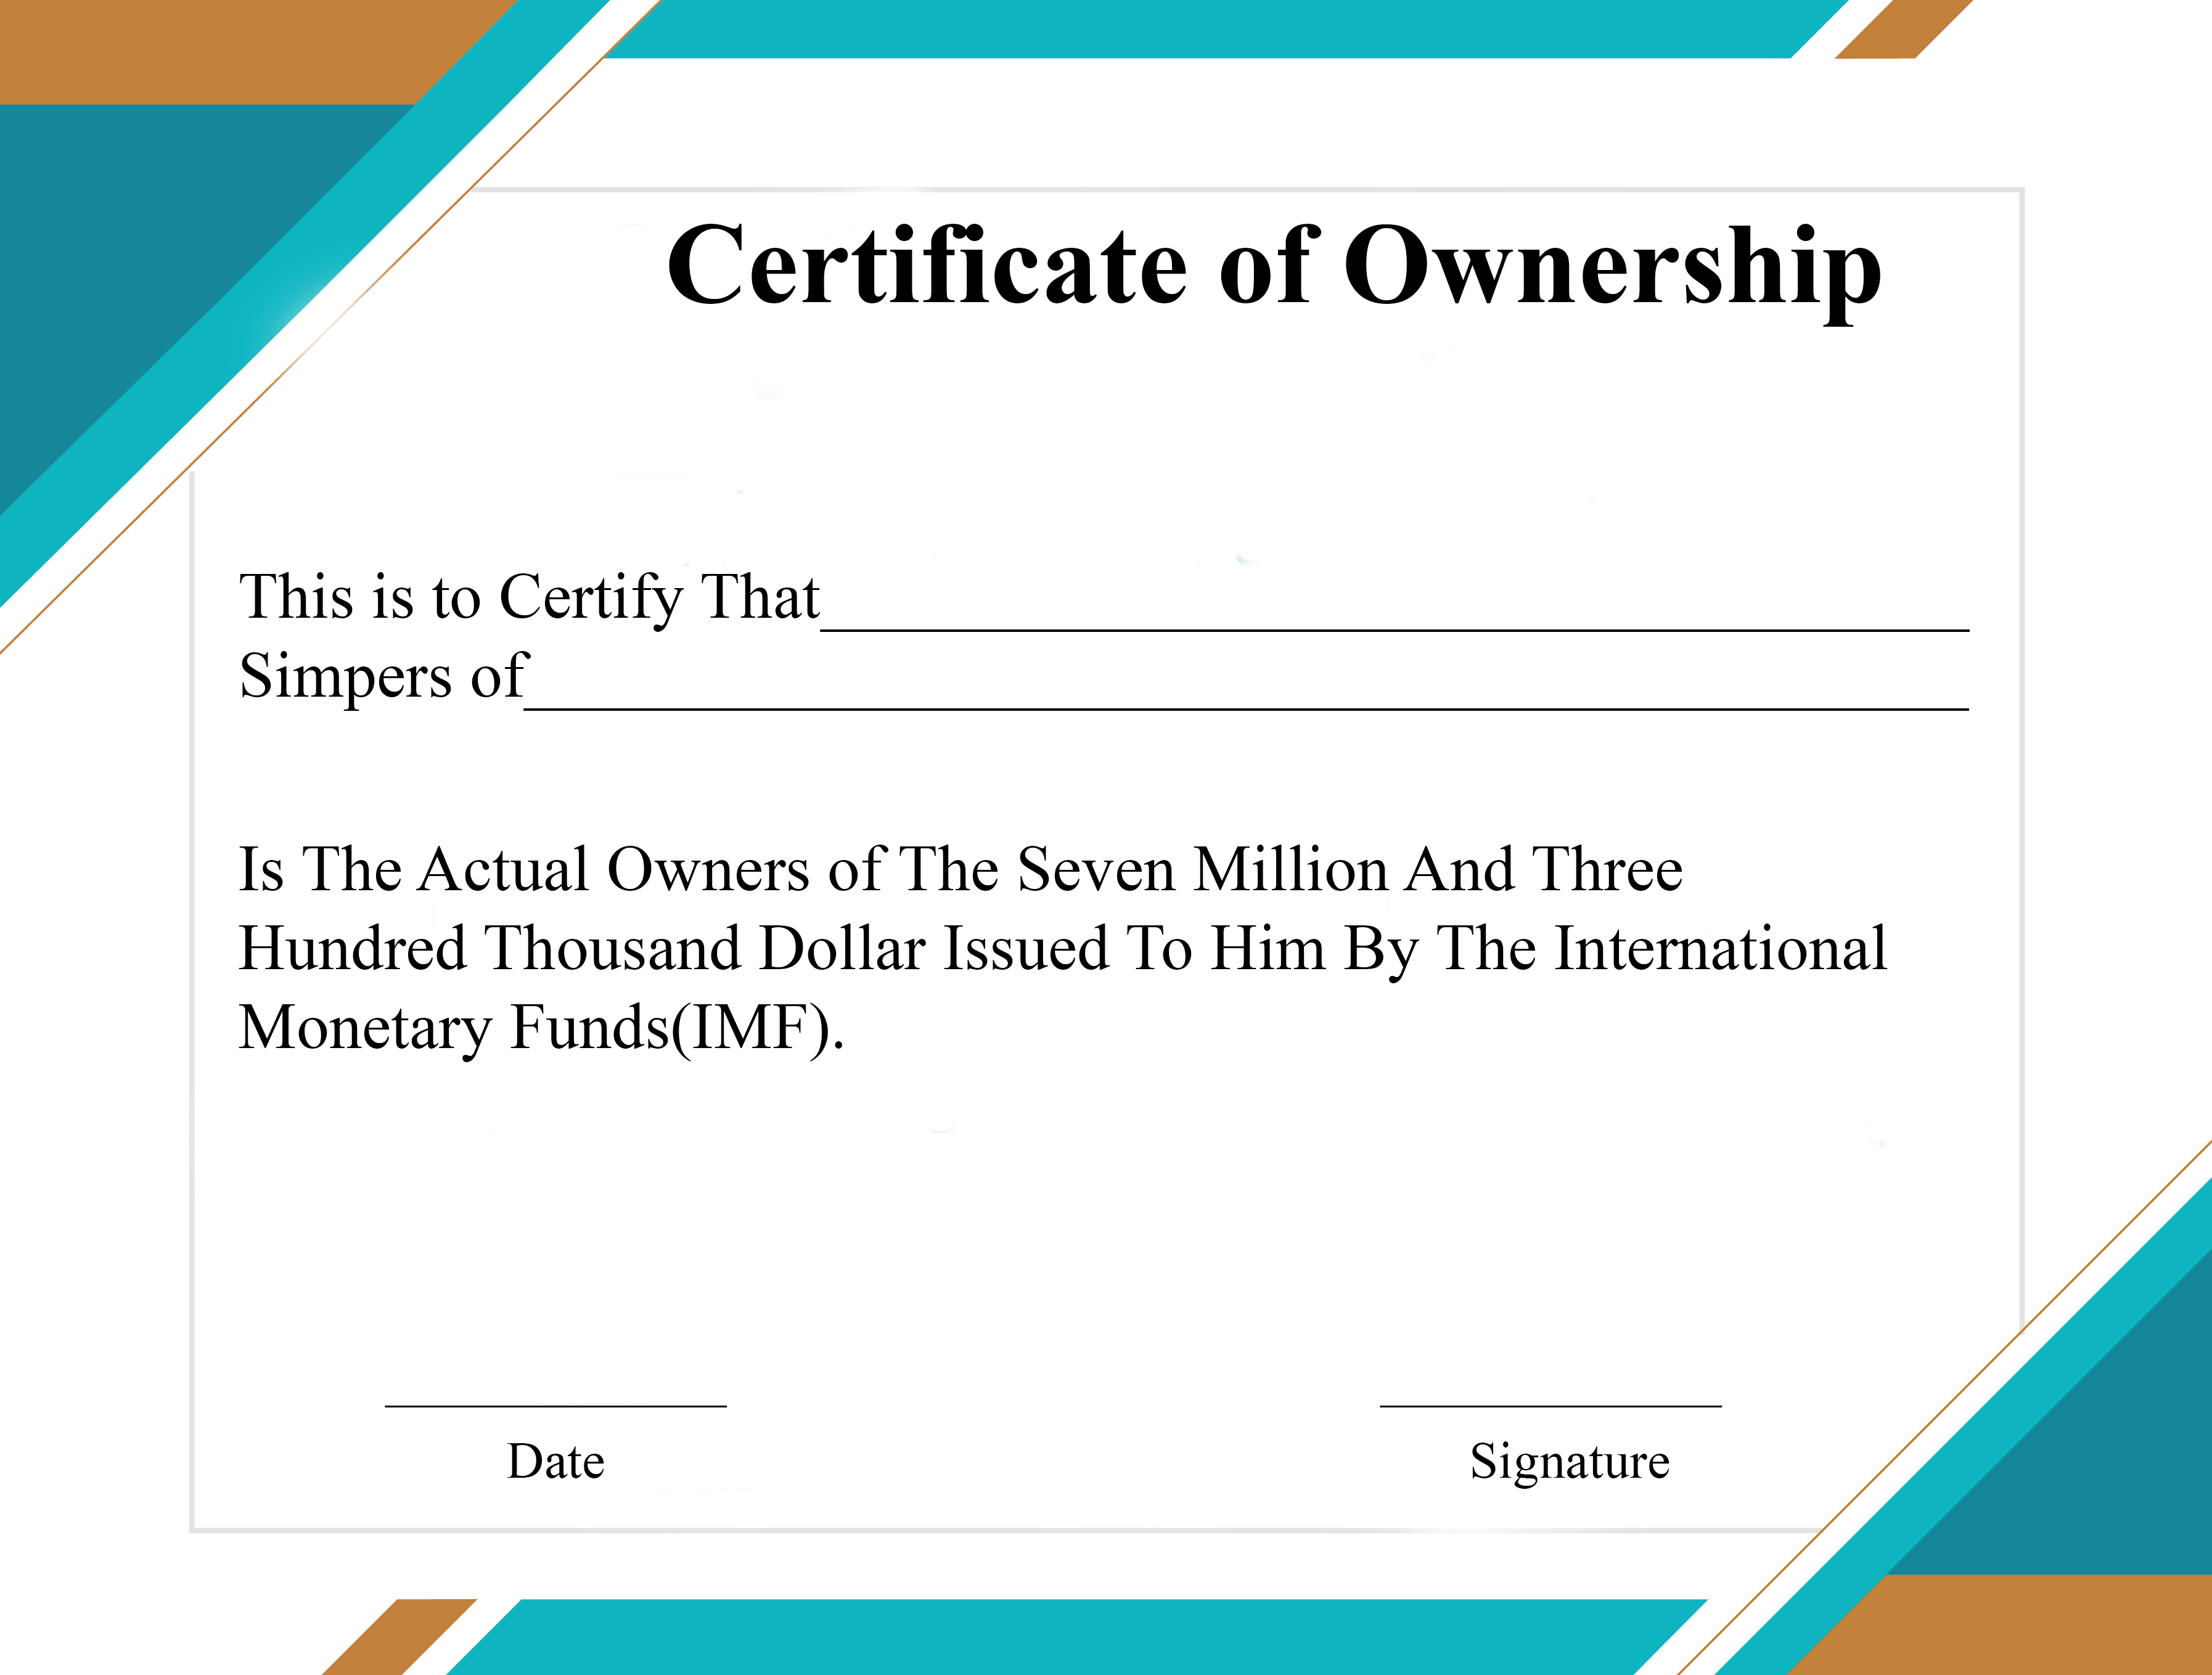 ❤️23+ Free Sample of Certificate of Ownership form Template❤️ With Regard To Ownership Certificate Template